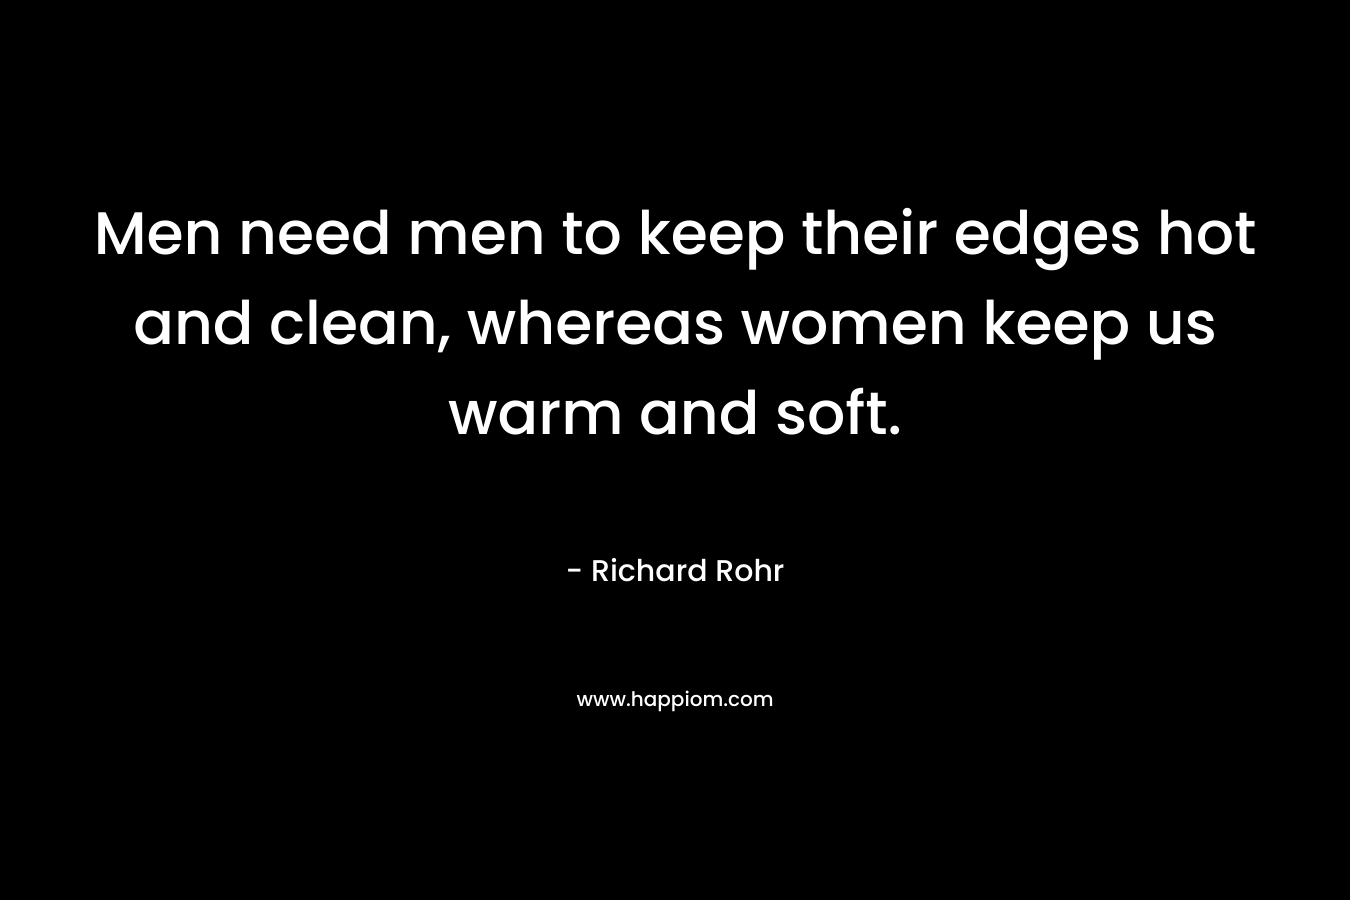 Men need men to keep their edges hot and clean, whereas women keep us warm and soft. – Richard Rohr